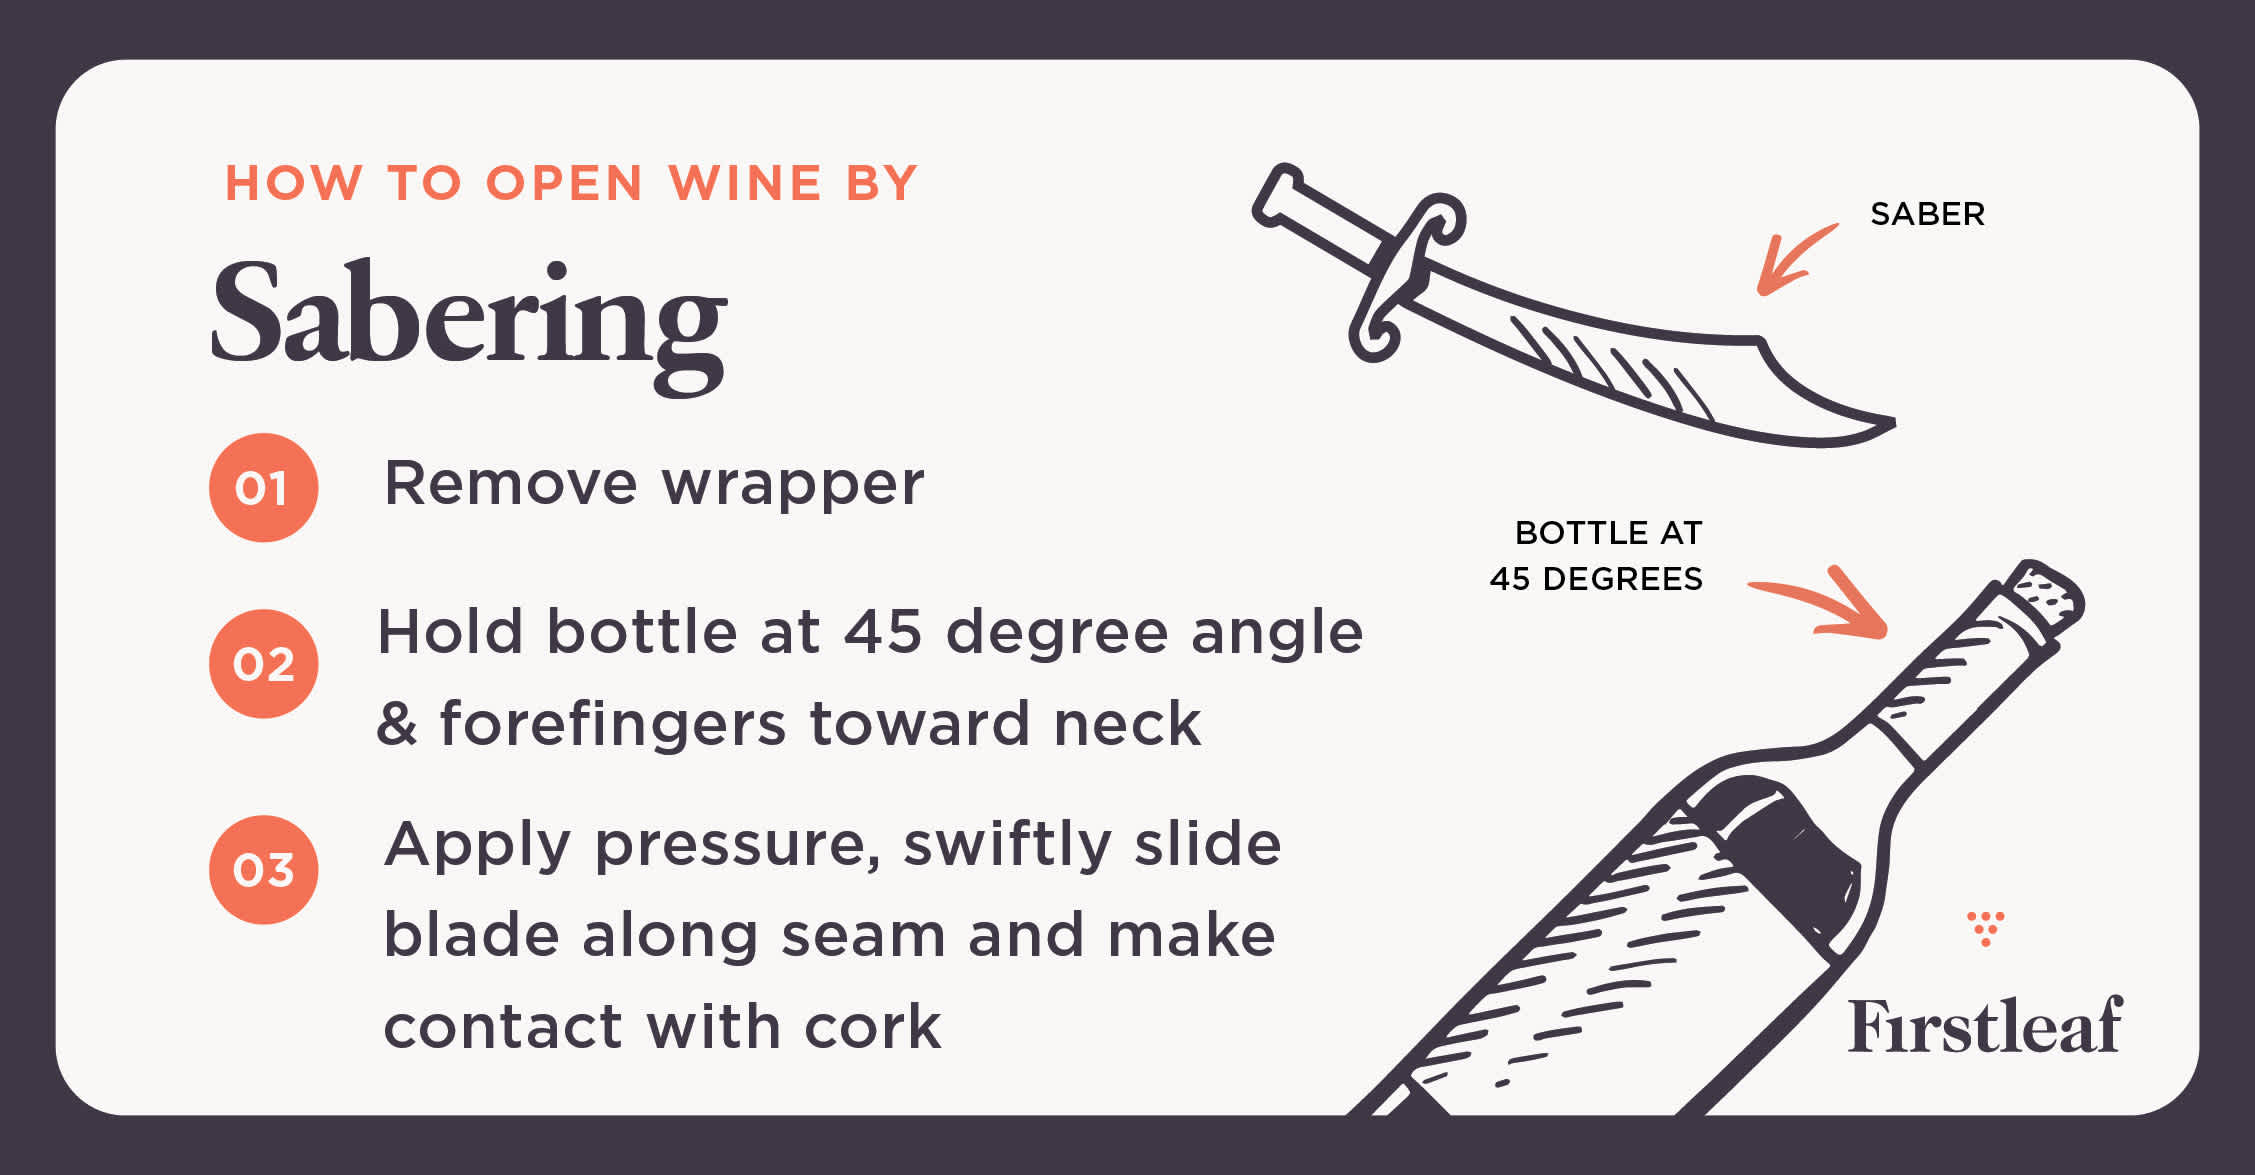 How to Open Wine by Sabering